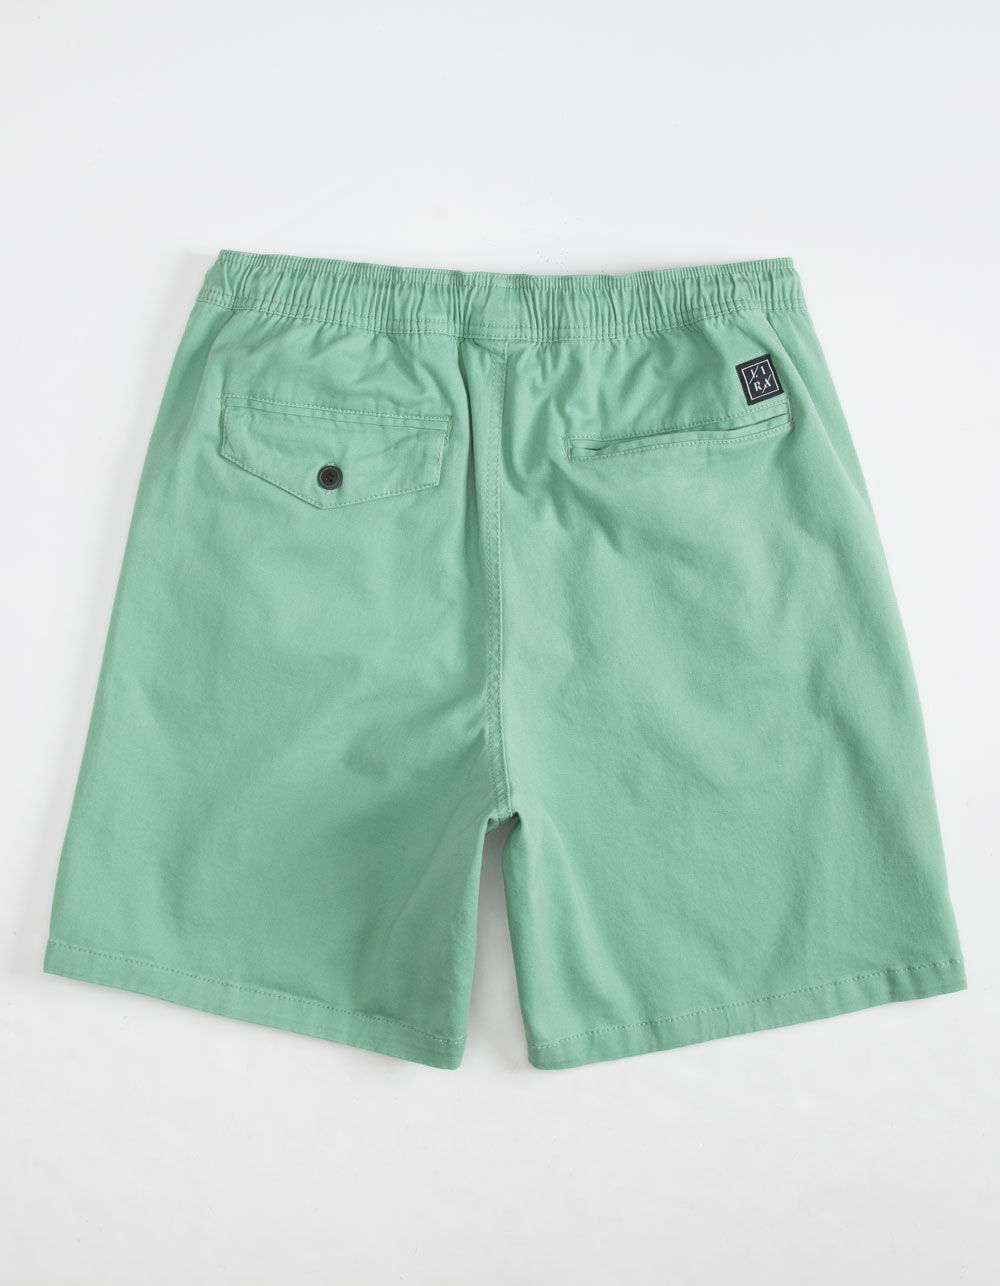 LIRA Forever Volley 2.0 Ivy Mens Volley Shorts - IVY | Tillys